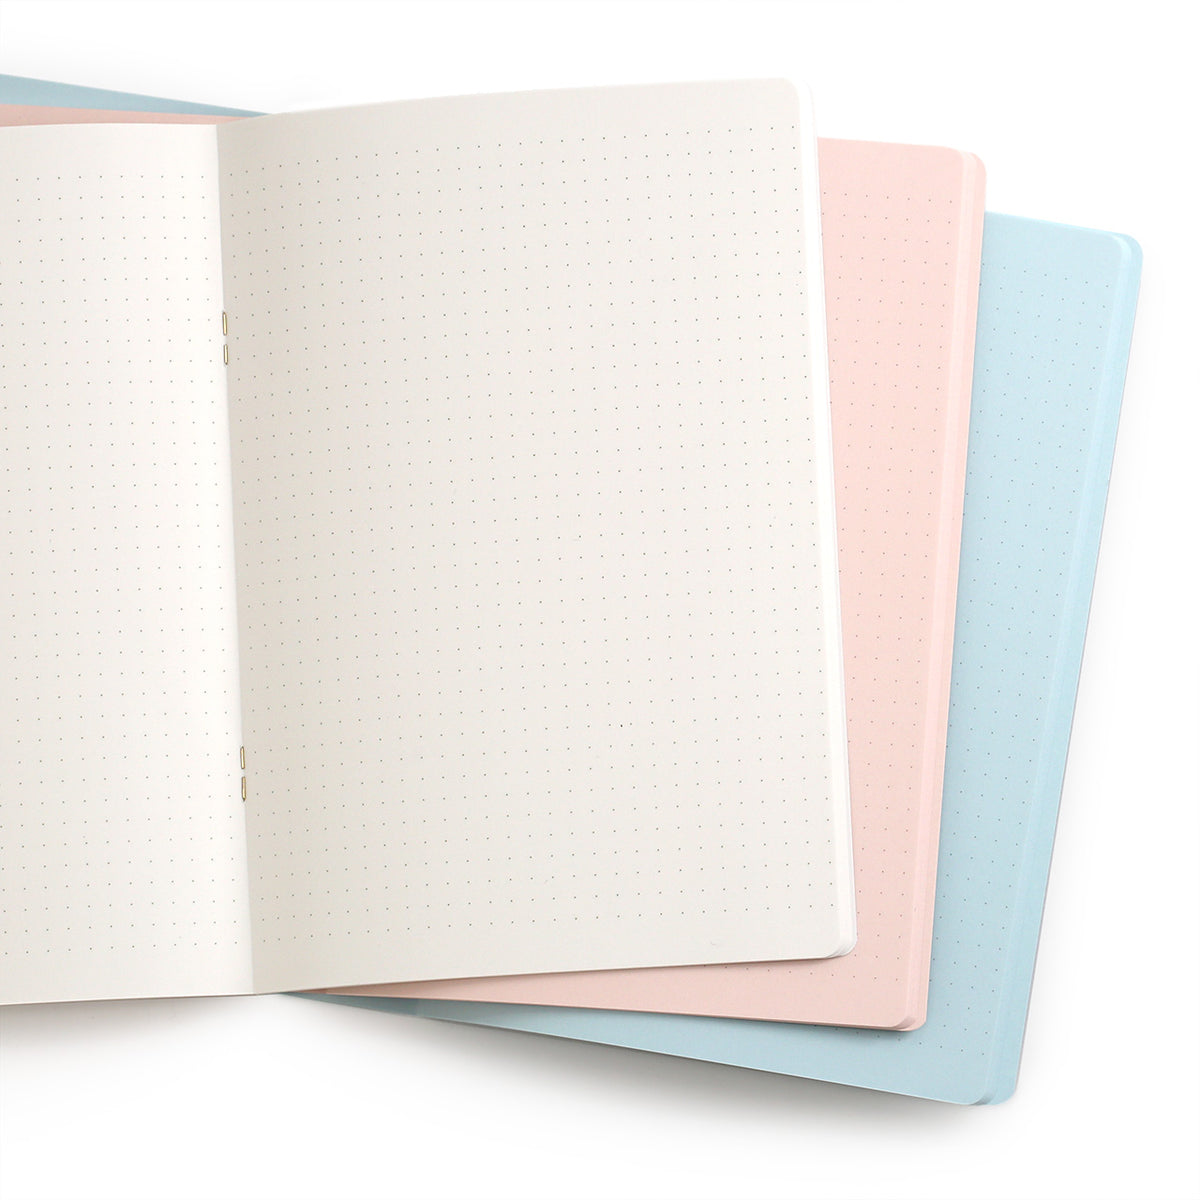 Midor dot grid notebooks open to show the cpages are coloured all through the book